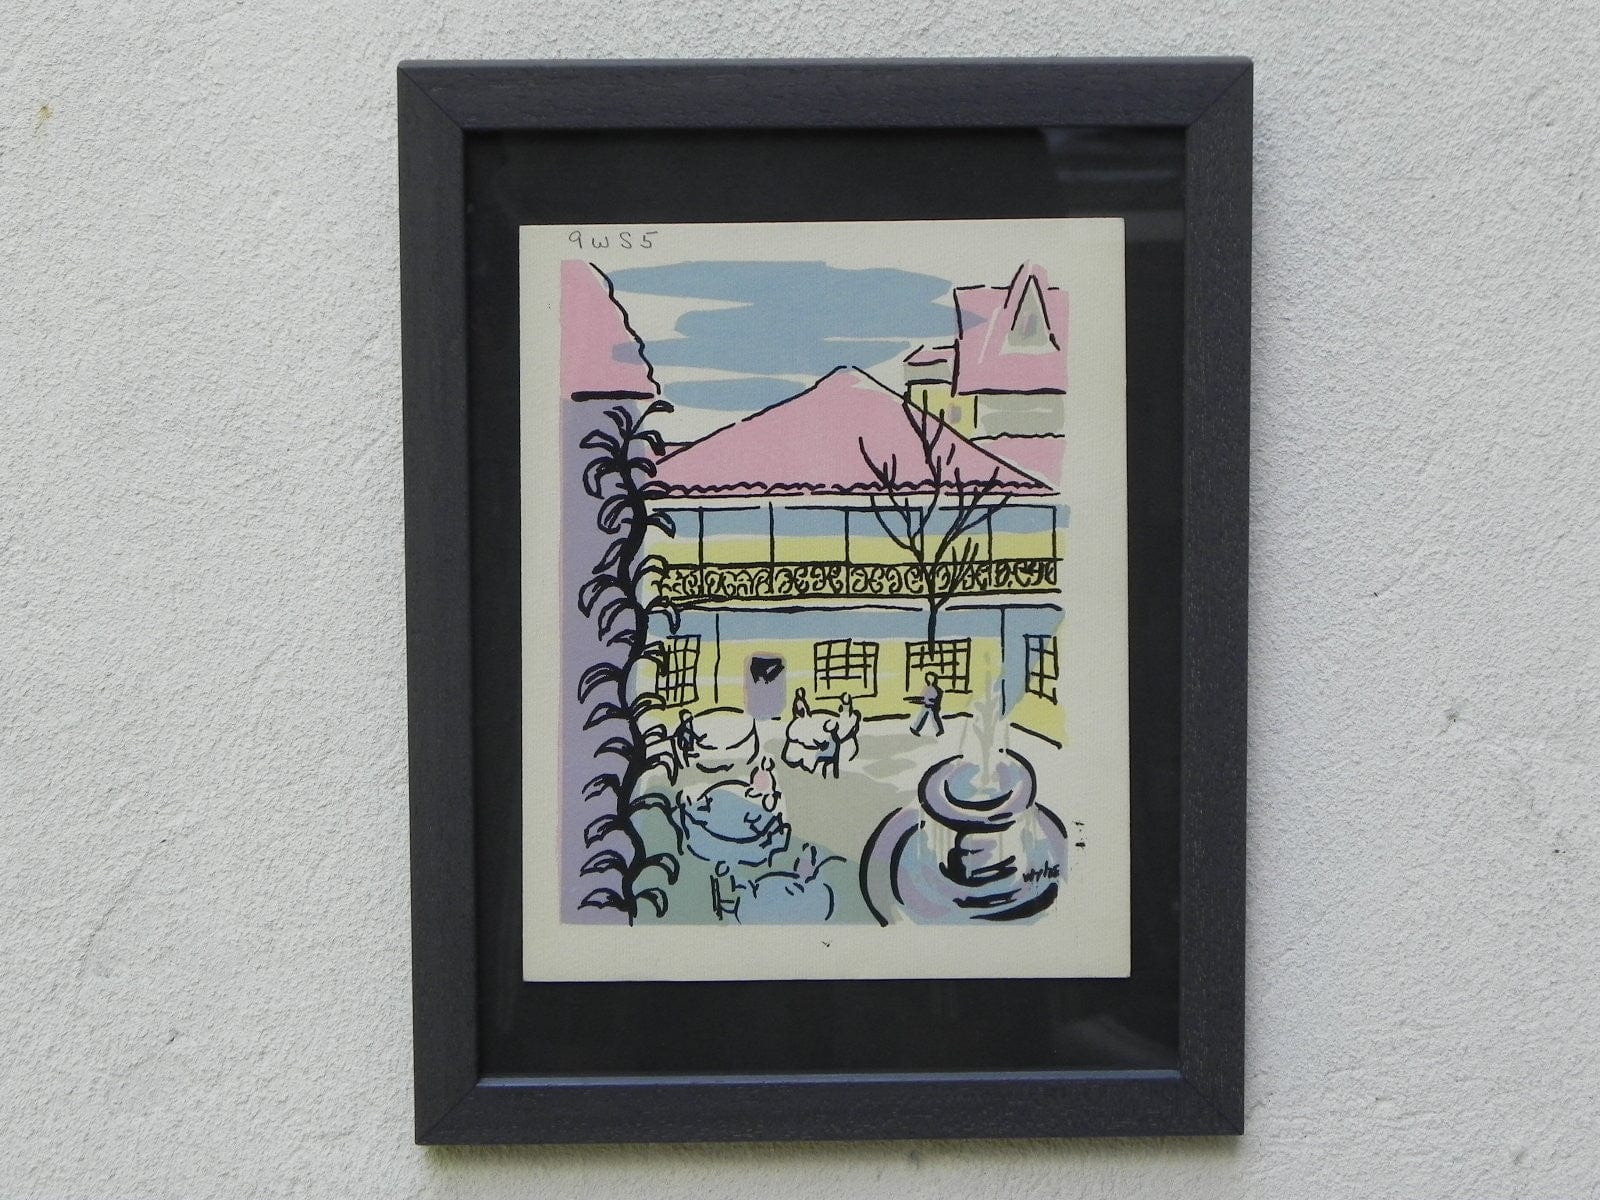 I Like Mike's Mid Century Modern Wall Decor & Art Mid-Century Lithograph by Wylie Newly Framed-Café Scene with Fountain, Pastel Colors